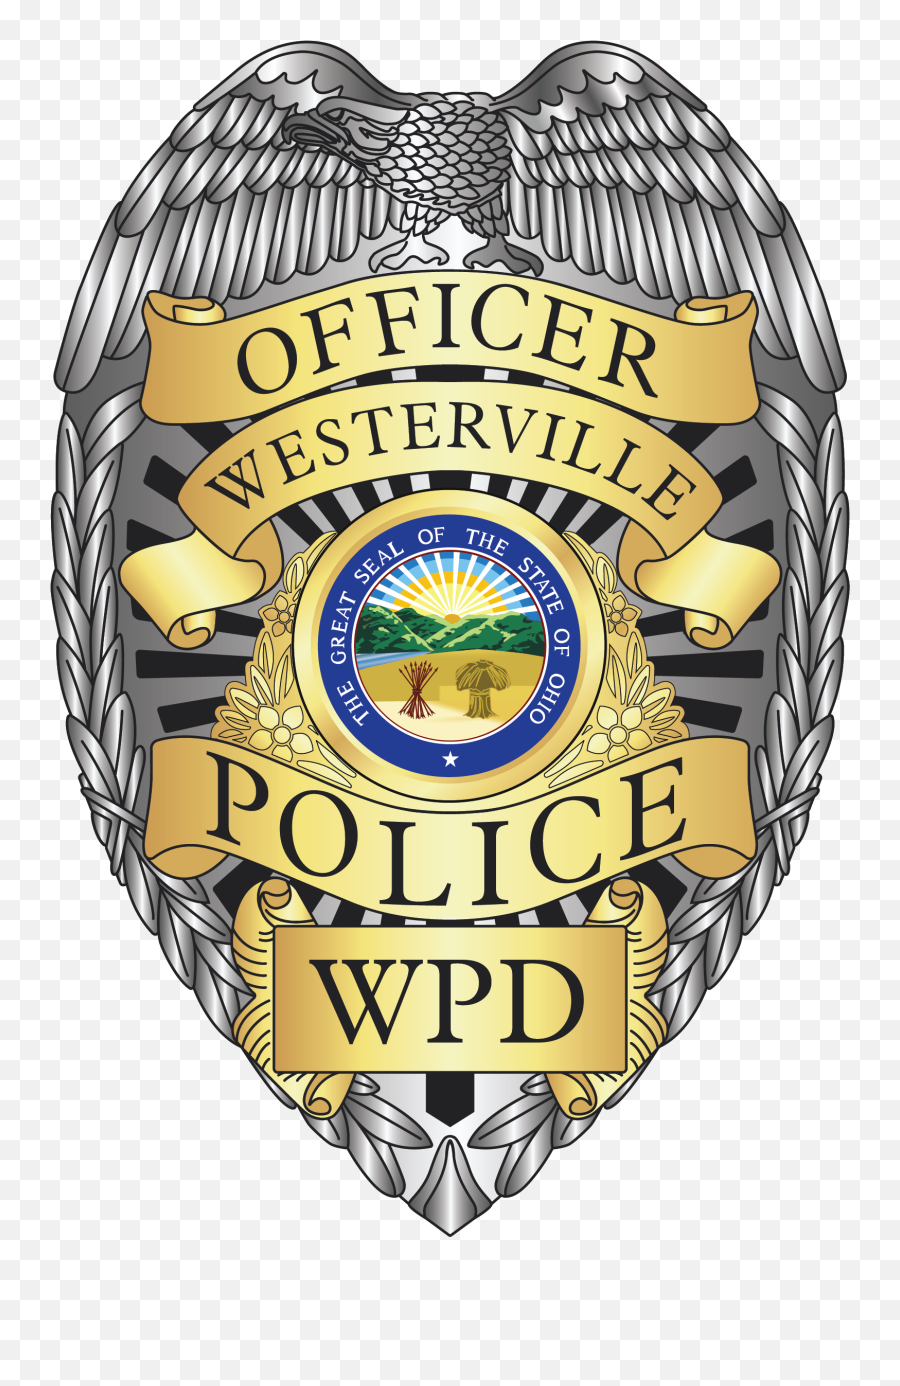 Police City Of Westerville Oh - Westerville Ohio Police Patches Emoji,Cops Chasing Car Emoji